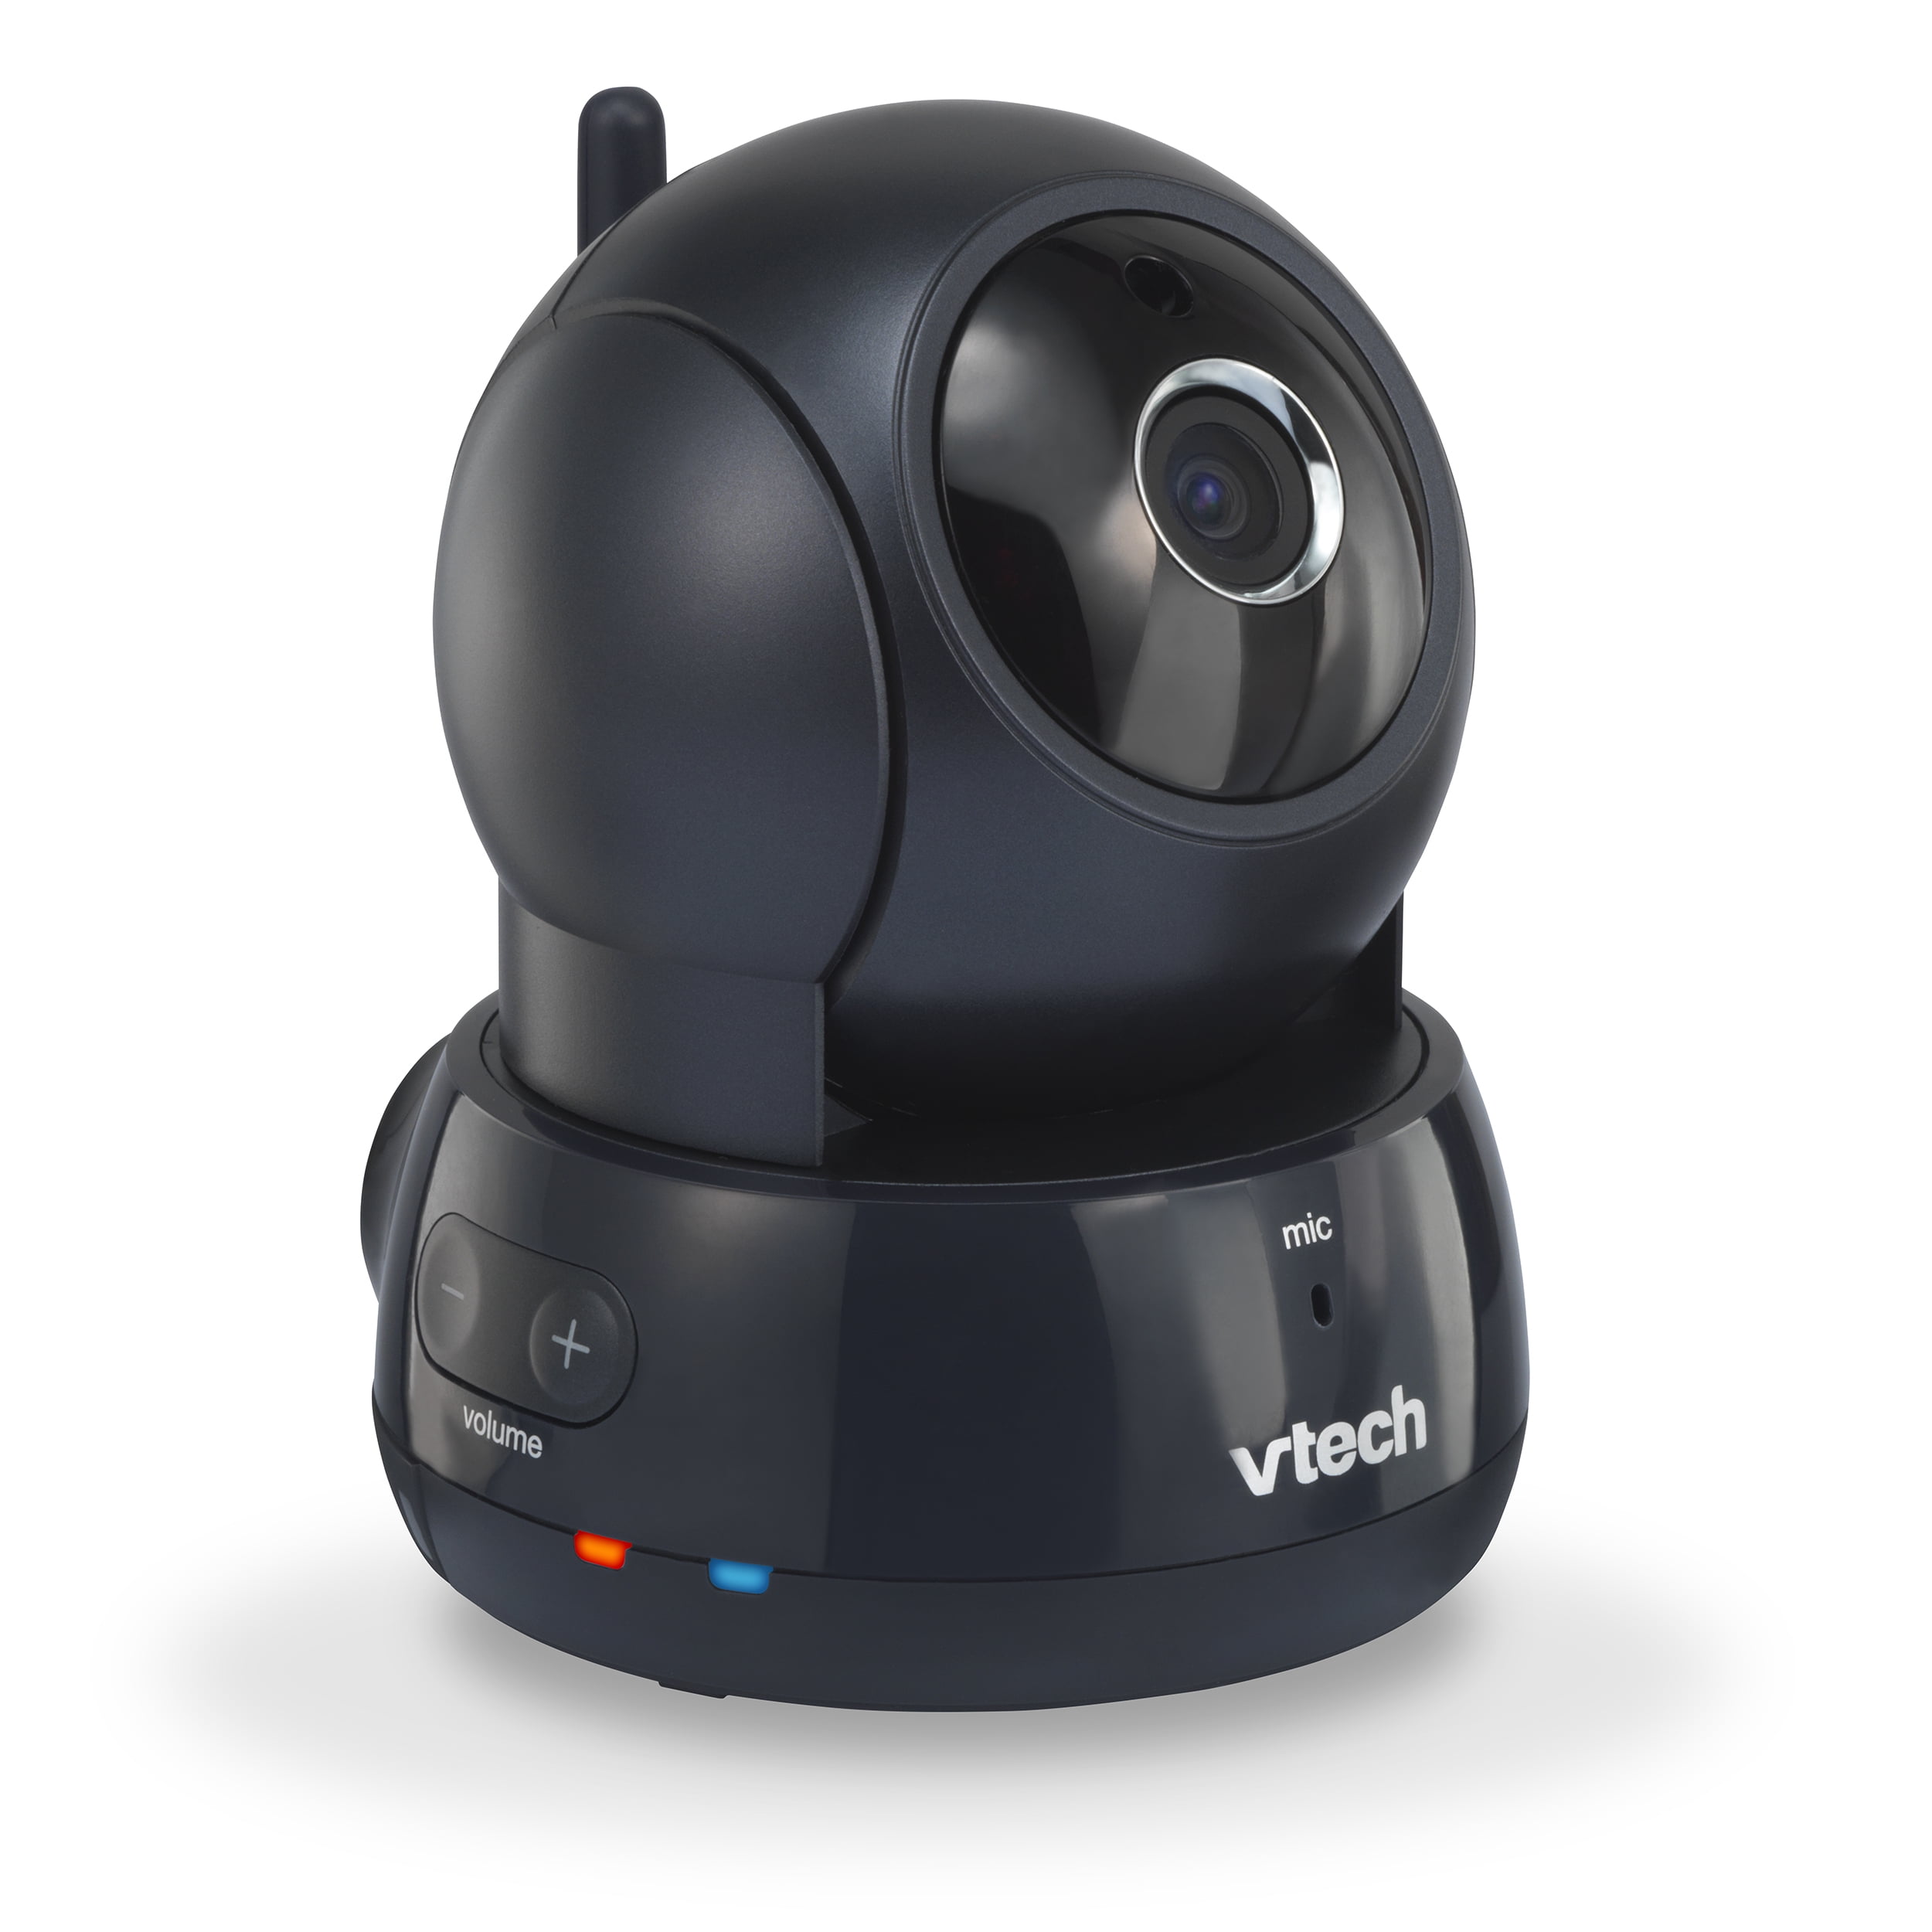 VTech VC9311-122 16GB Wi-Fi IP Video Camera with Remote Pan and Tilt, Free Live Streaming and Automatic Infrared Night Vision, Graphite